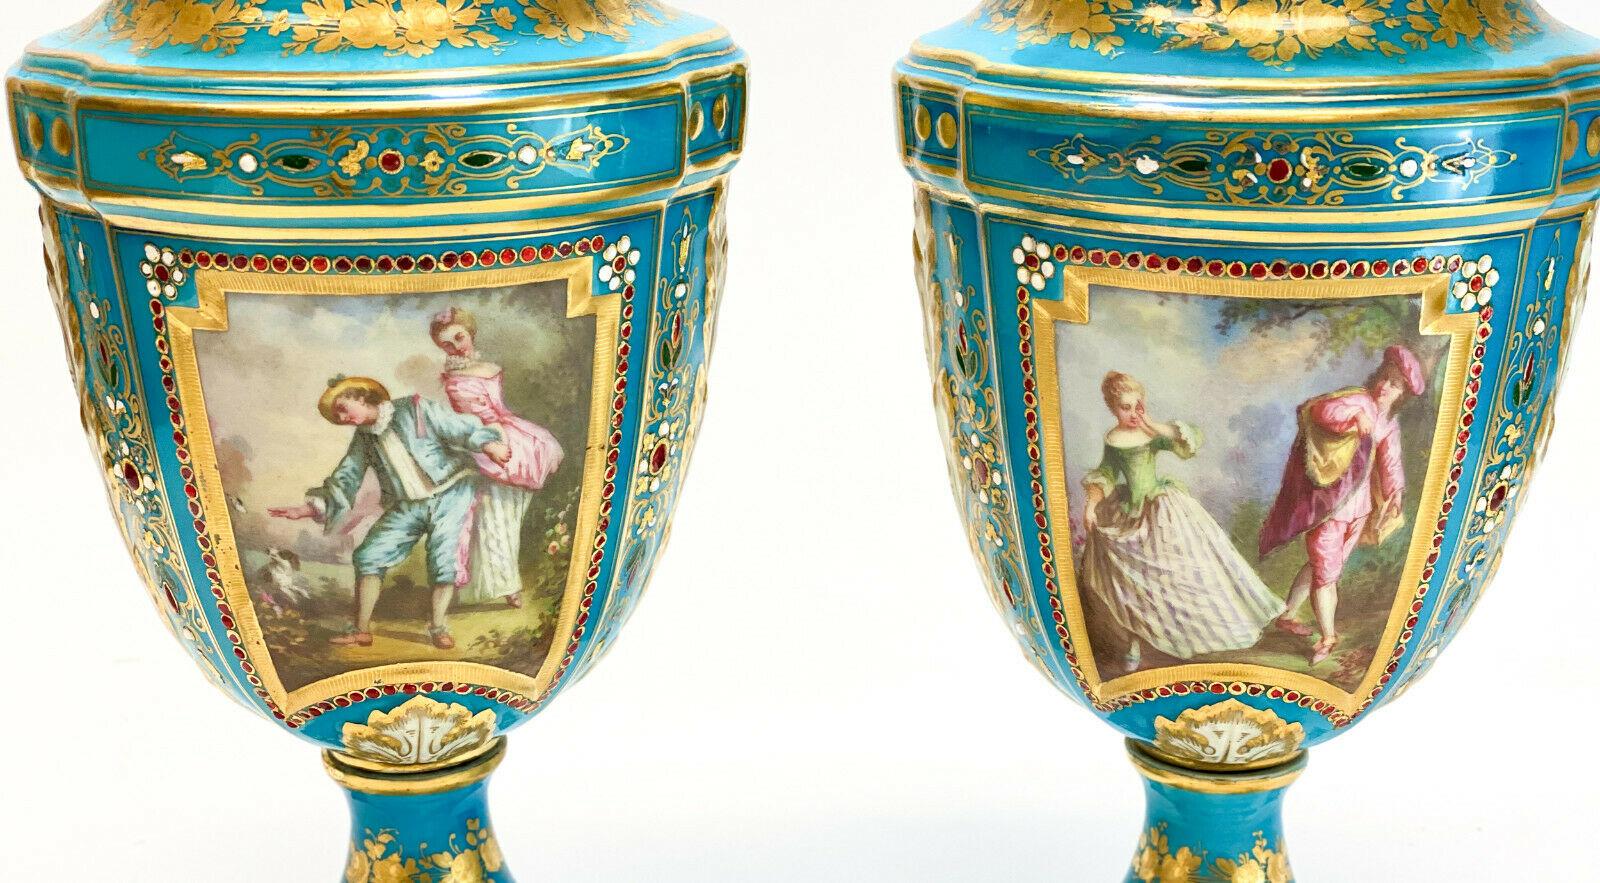 A pair of Sèvres porcelain hand painted jeweled enamel lidded urns, 19th century. A turquoise blue ground with hand painted courting scenes to the central area and floral bouquets to the verso. Applied red jeweled accents throughout. Marked for